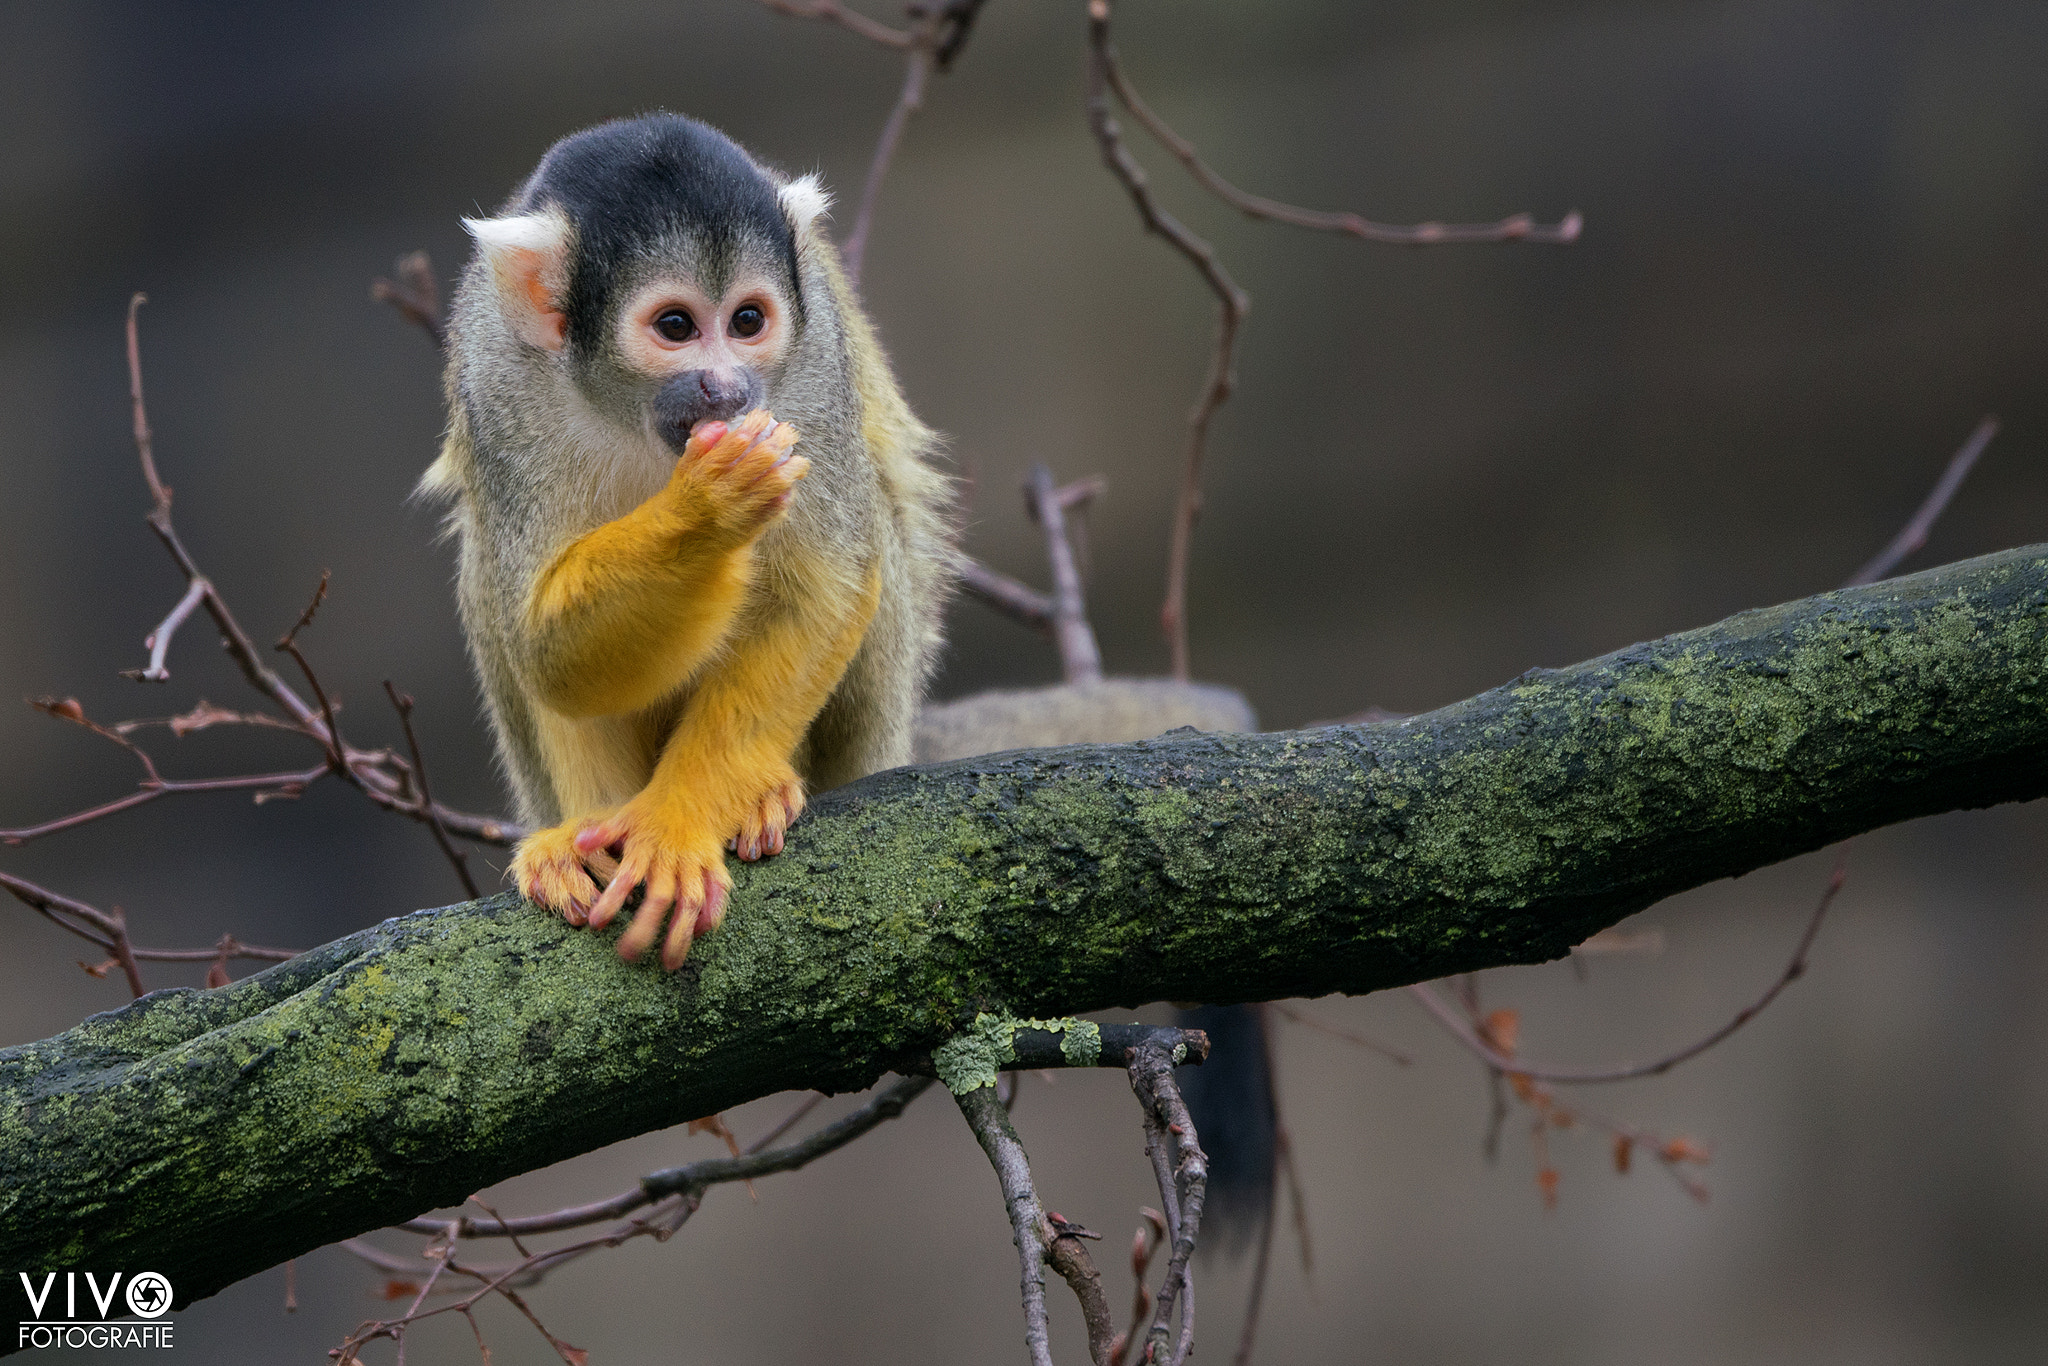 Sony a99 II sample photo. Squirrel monkey photography